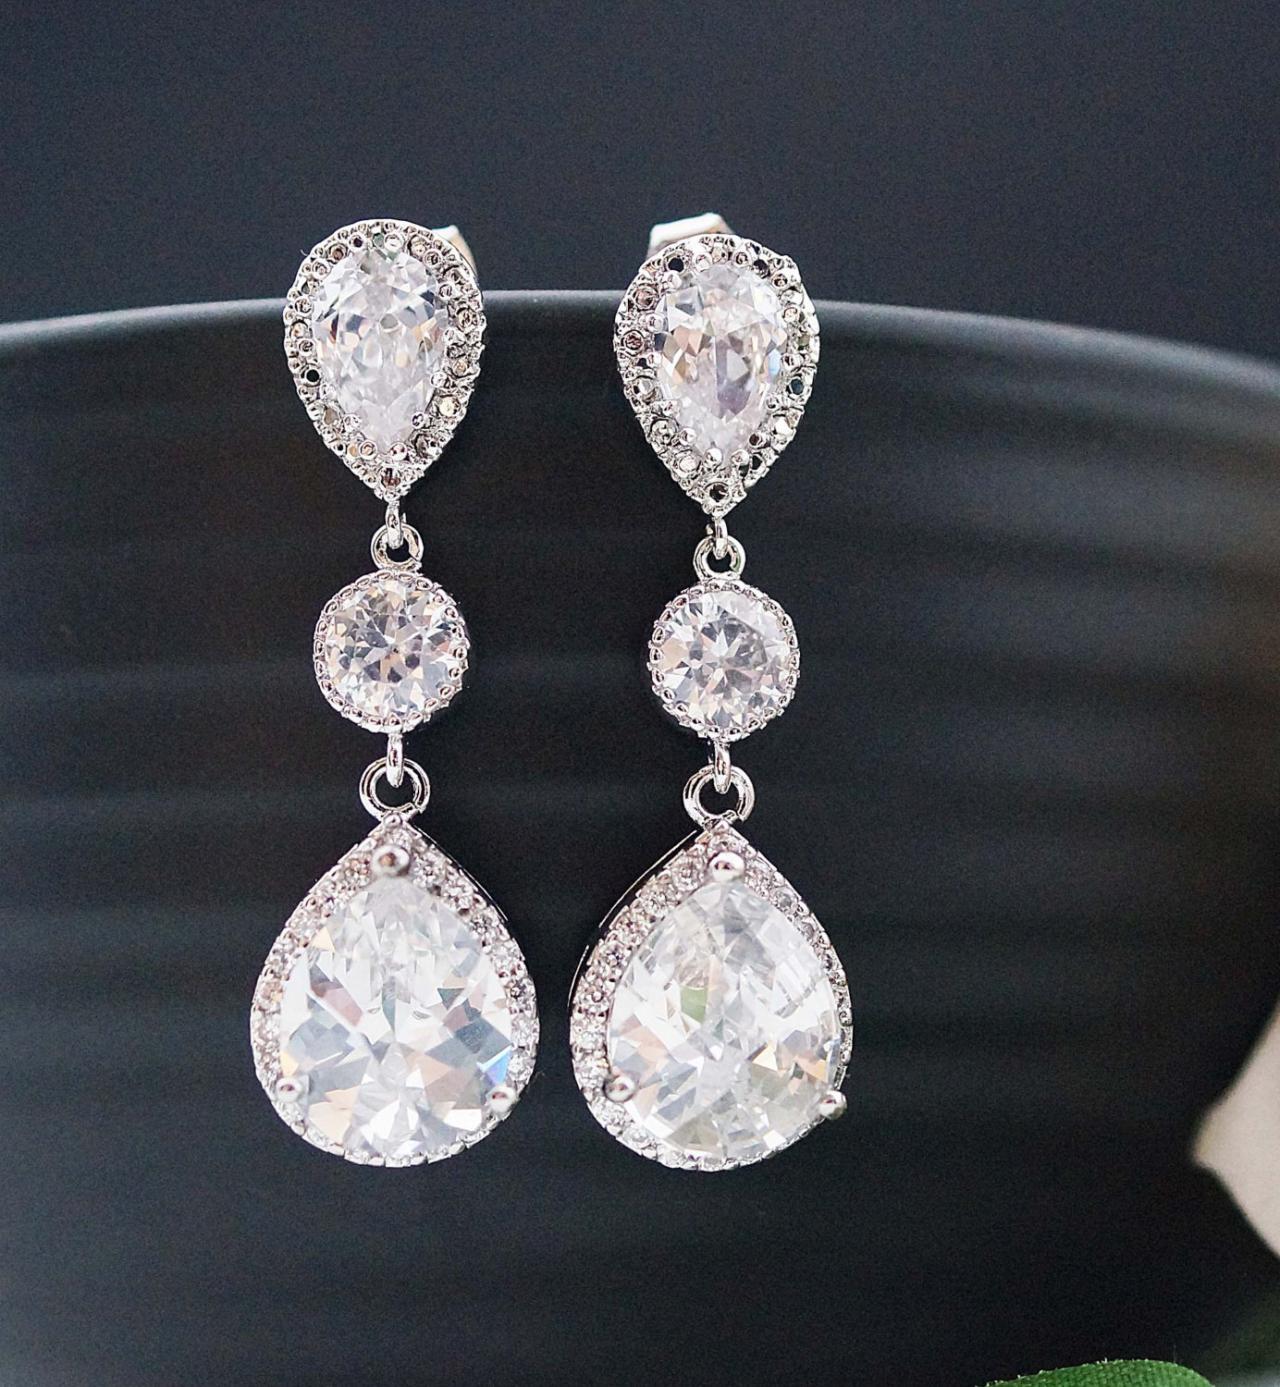 Wedding Bridal Jewelry Bridal Earrings Dangle Earrings cubic zirconia connectors and clear white (LUX) cubic zirconia tear drop Earrings